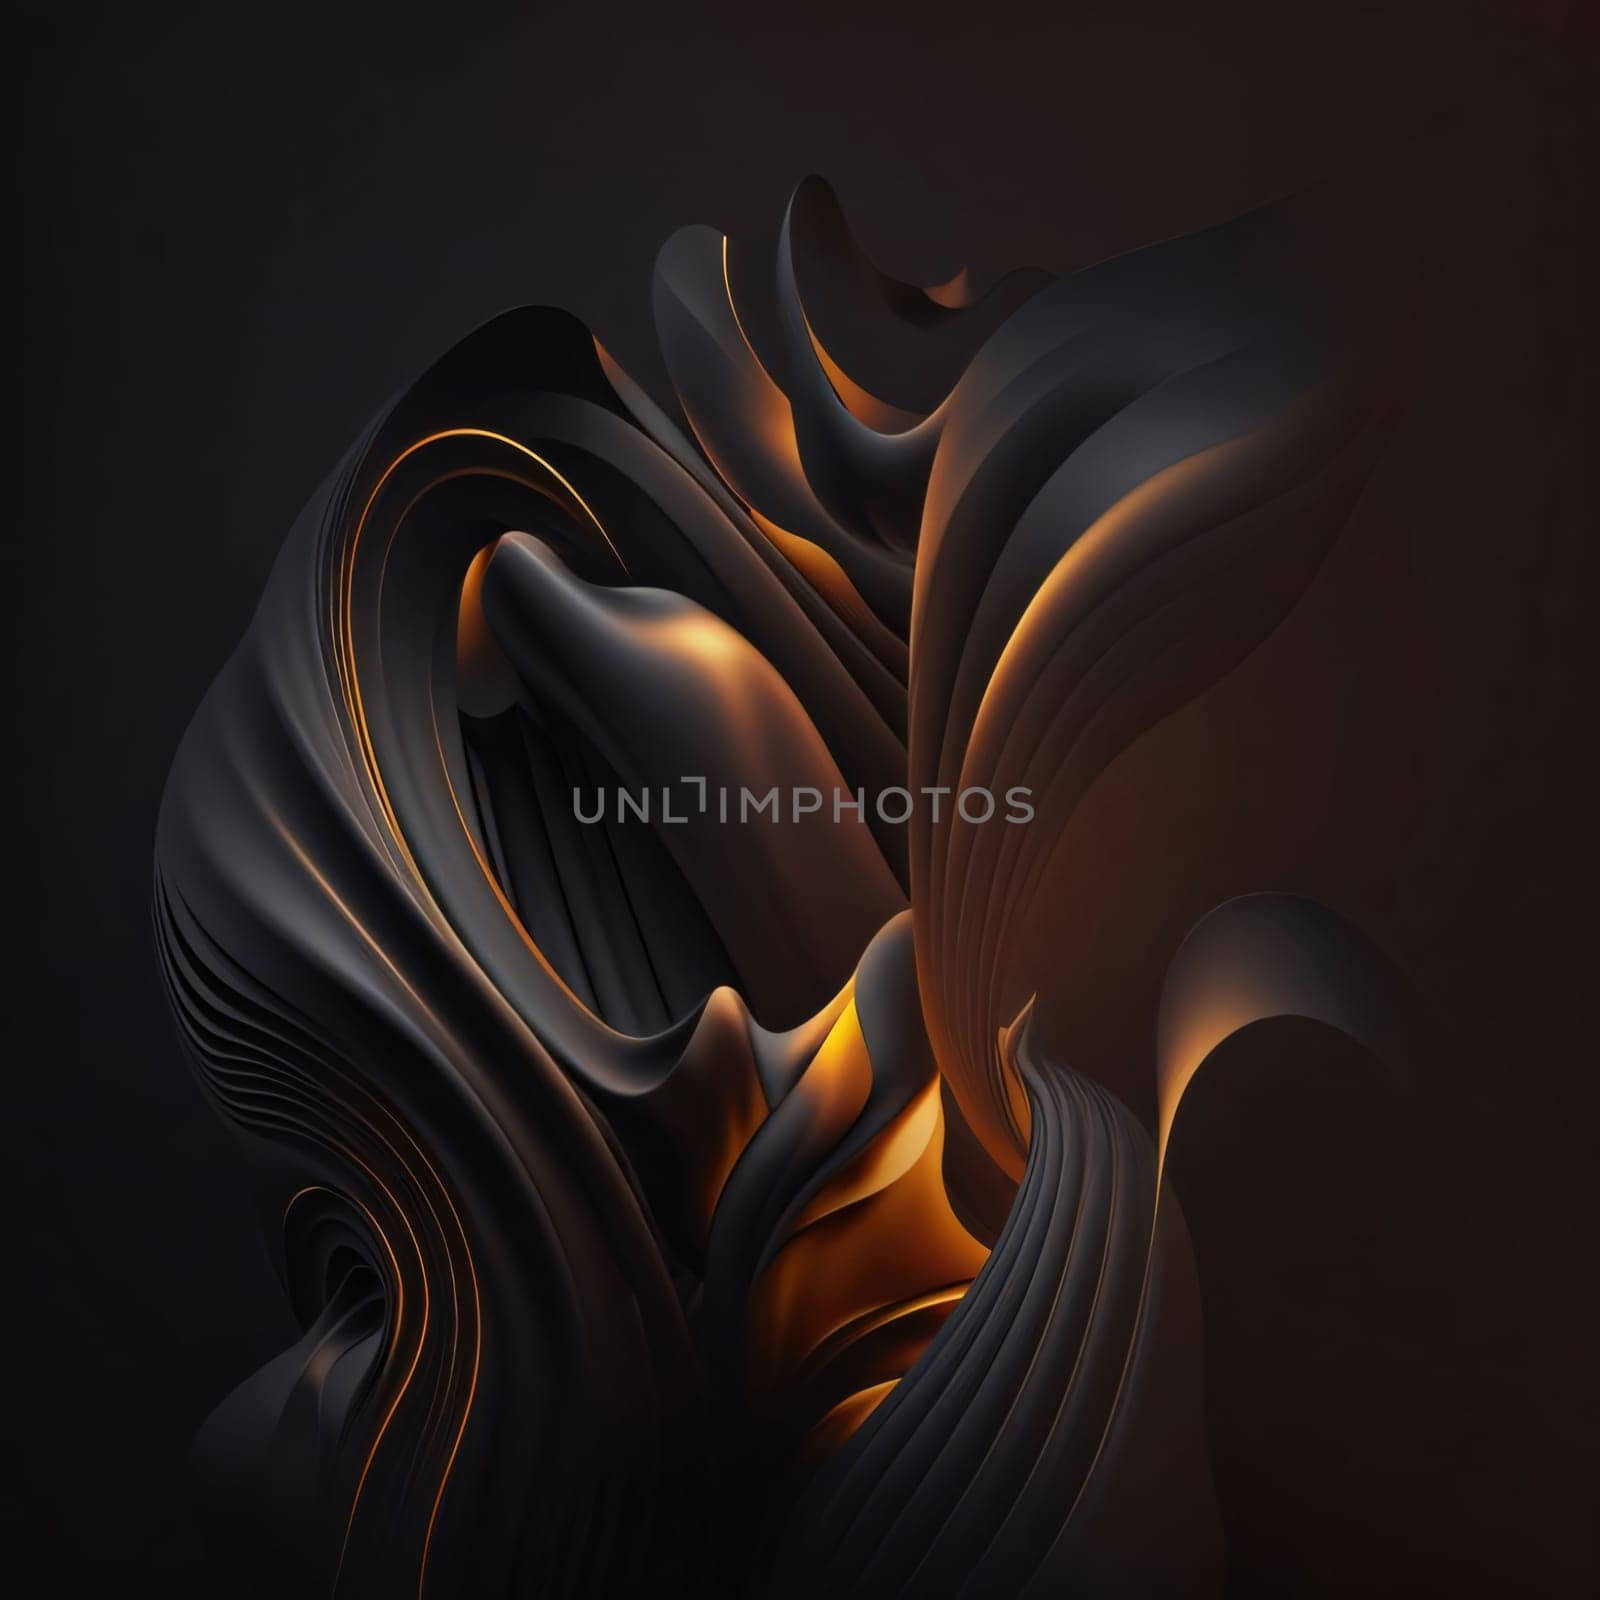 Abstract background design: Abstract 3d rendering of wavy shape. Futuristic background design for poster, cover, branding.